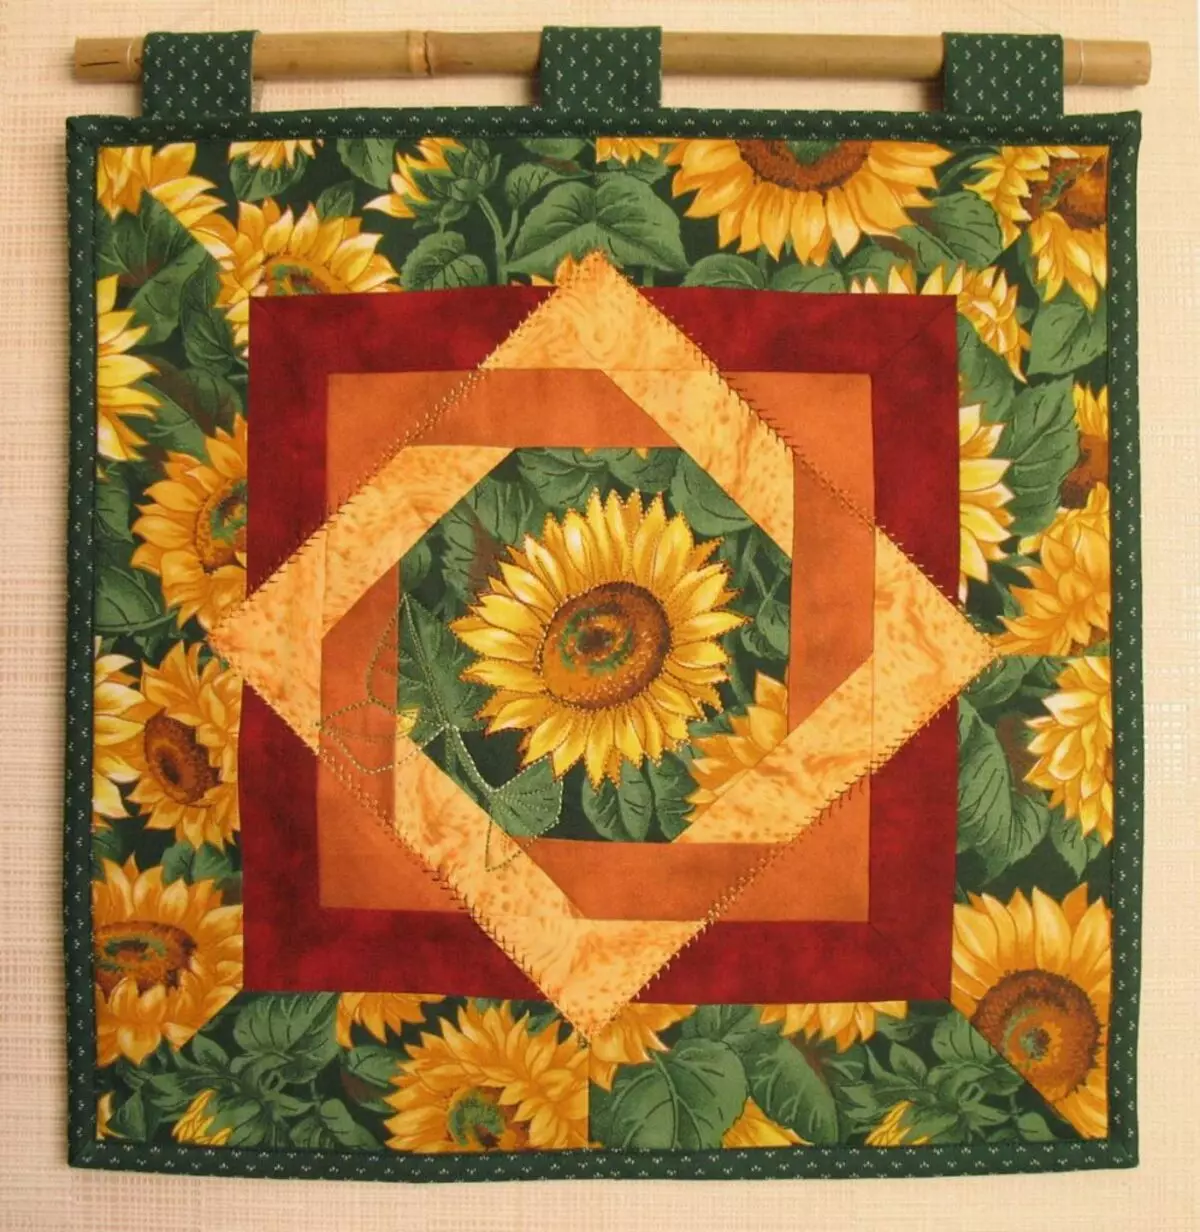 Panel from Modern fabric